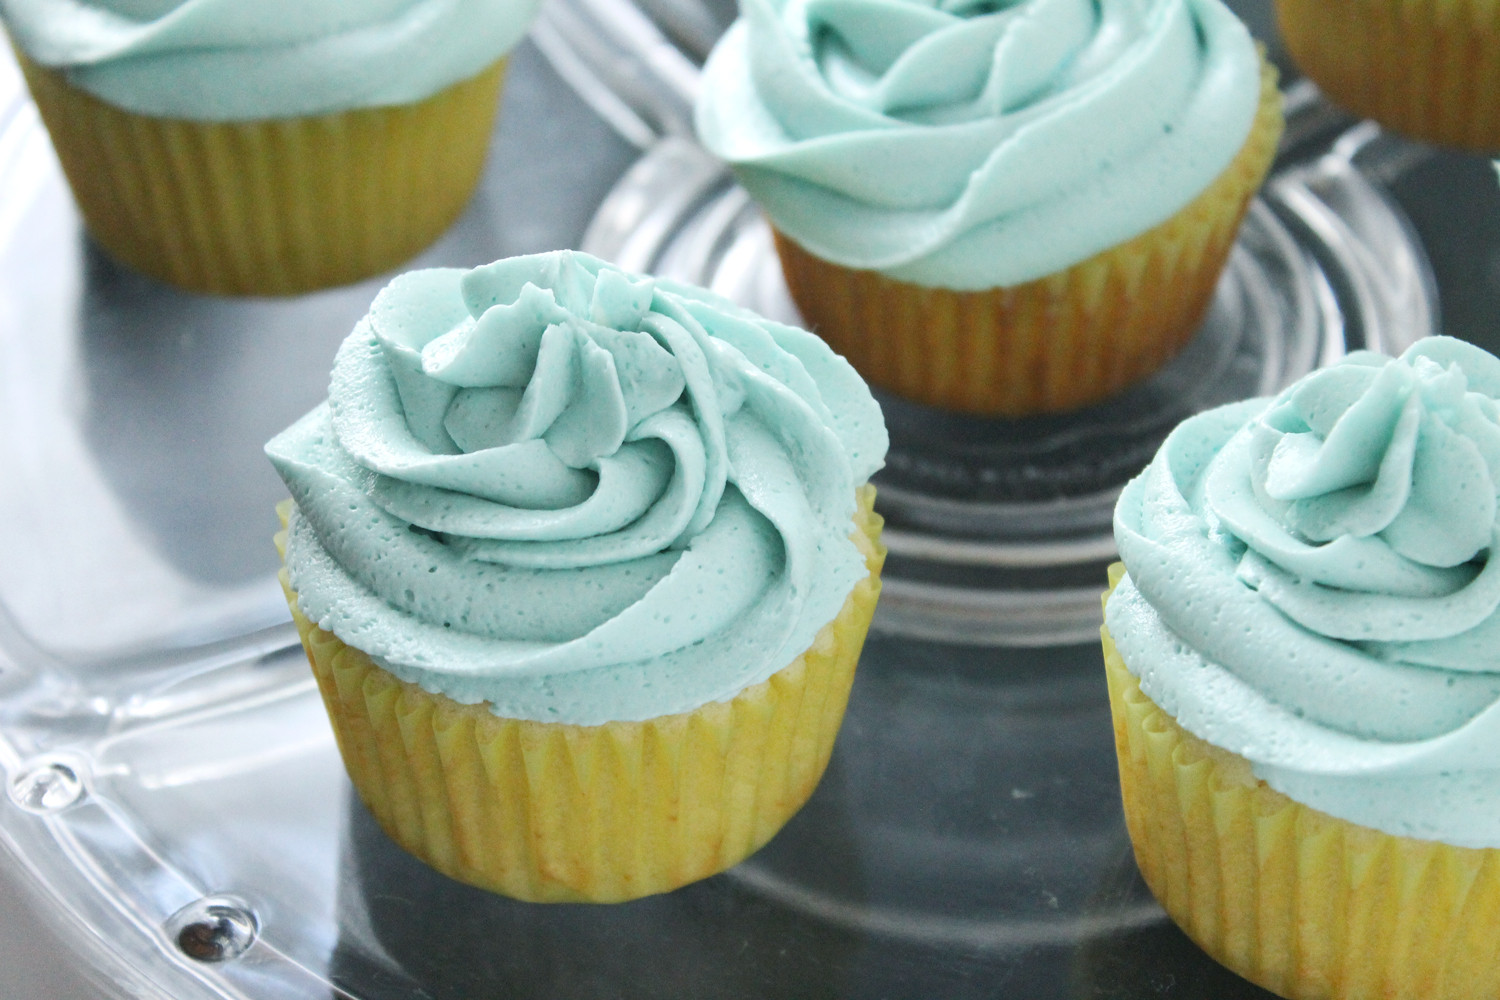 How To Make Cupcakes From Scratch
 Simple Vanilla Cupcakes from Scratch